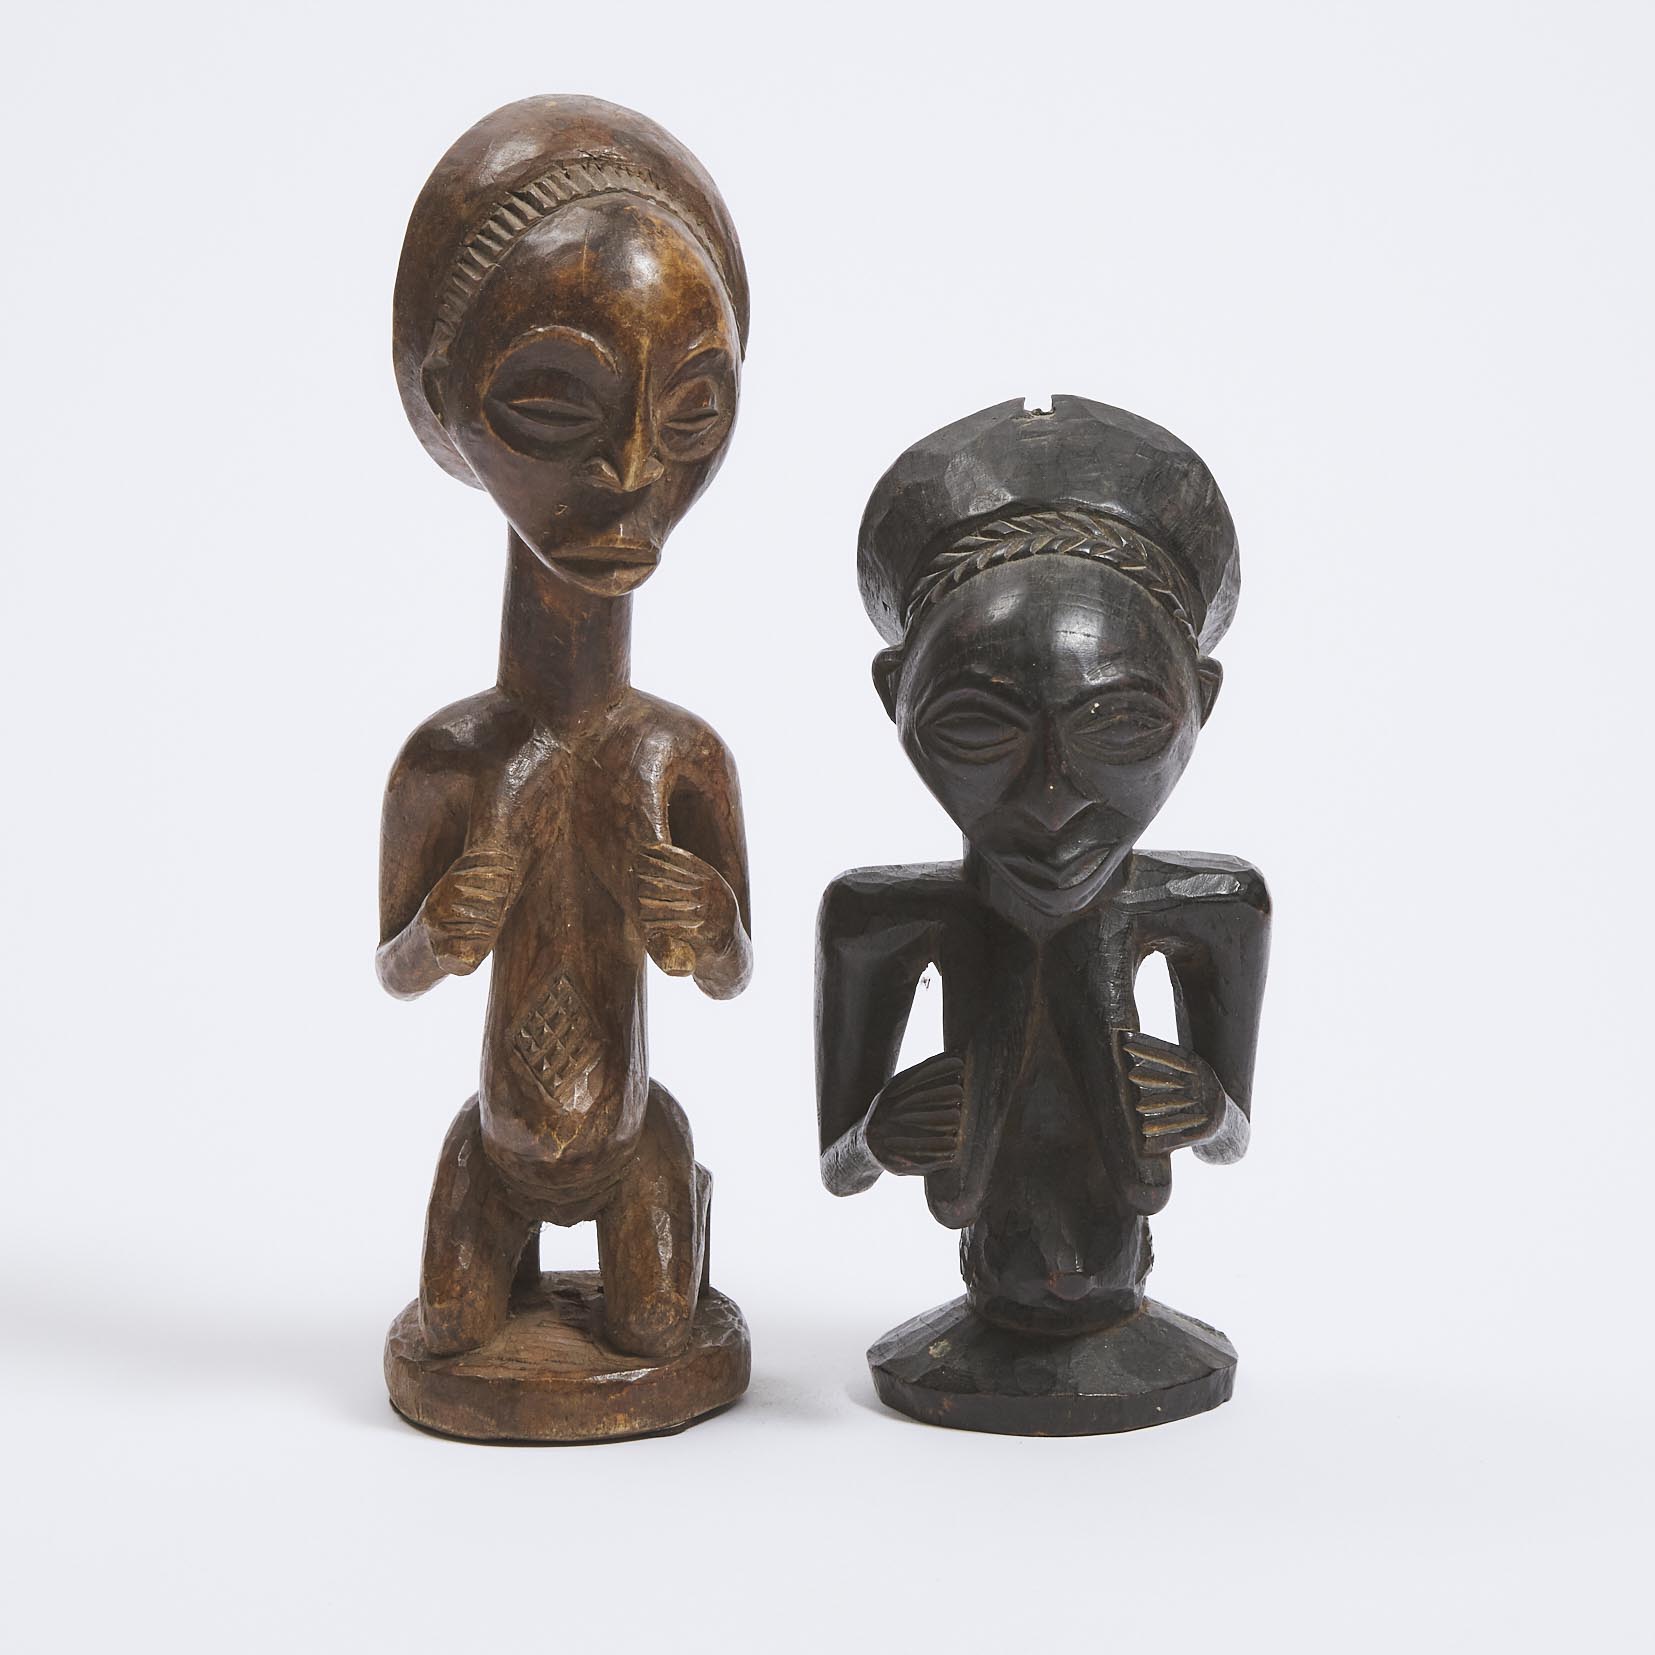 Two Luba Maternity Figures, Democratic Republic of Congo, Central Africa, late 20th century